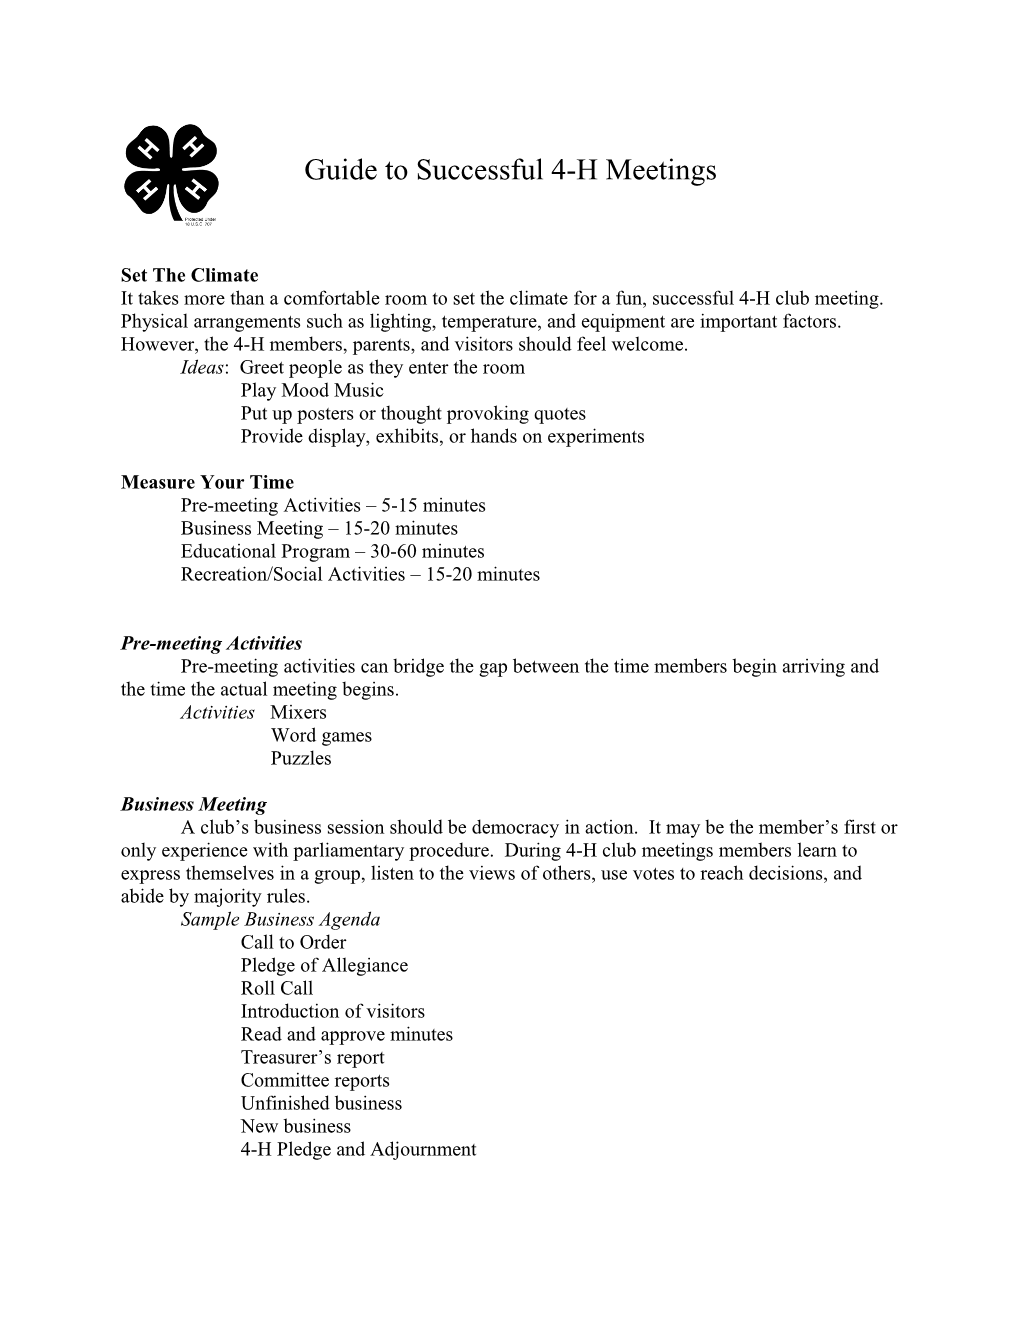 Guide to Successful 4-H Meetings